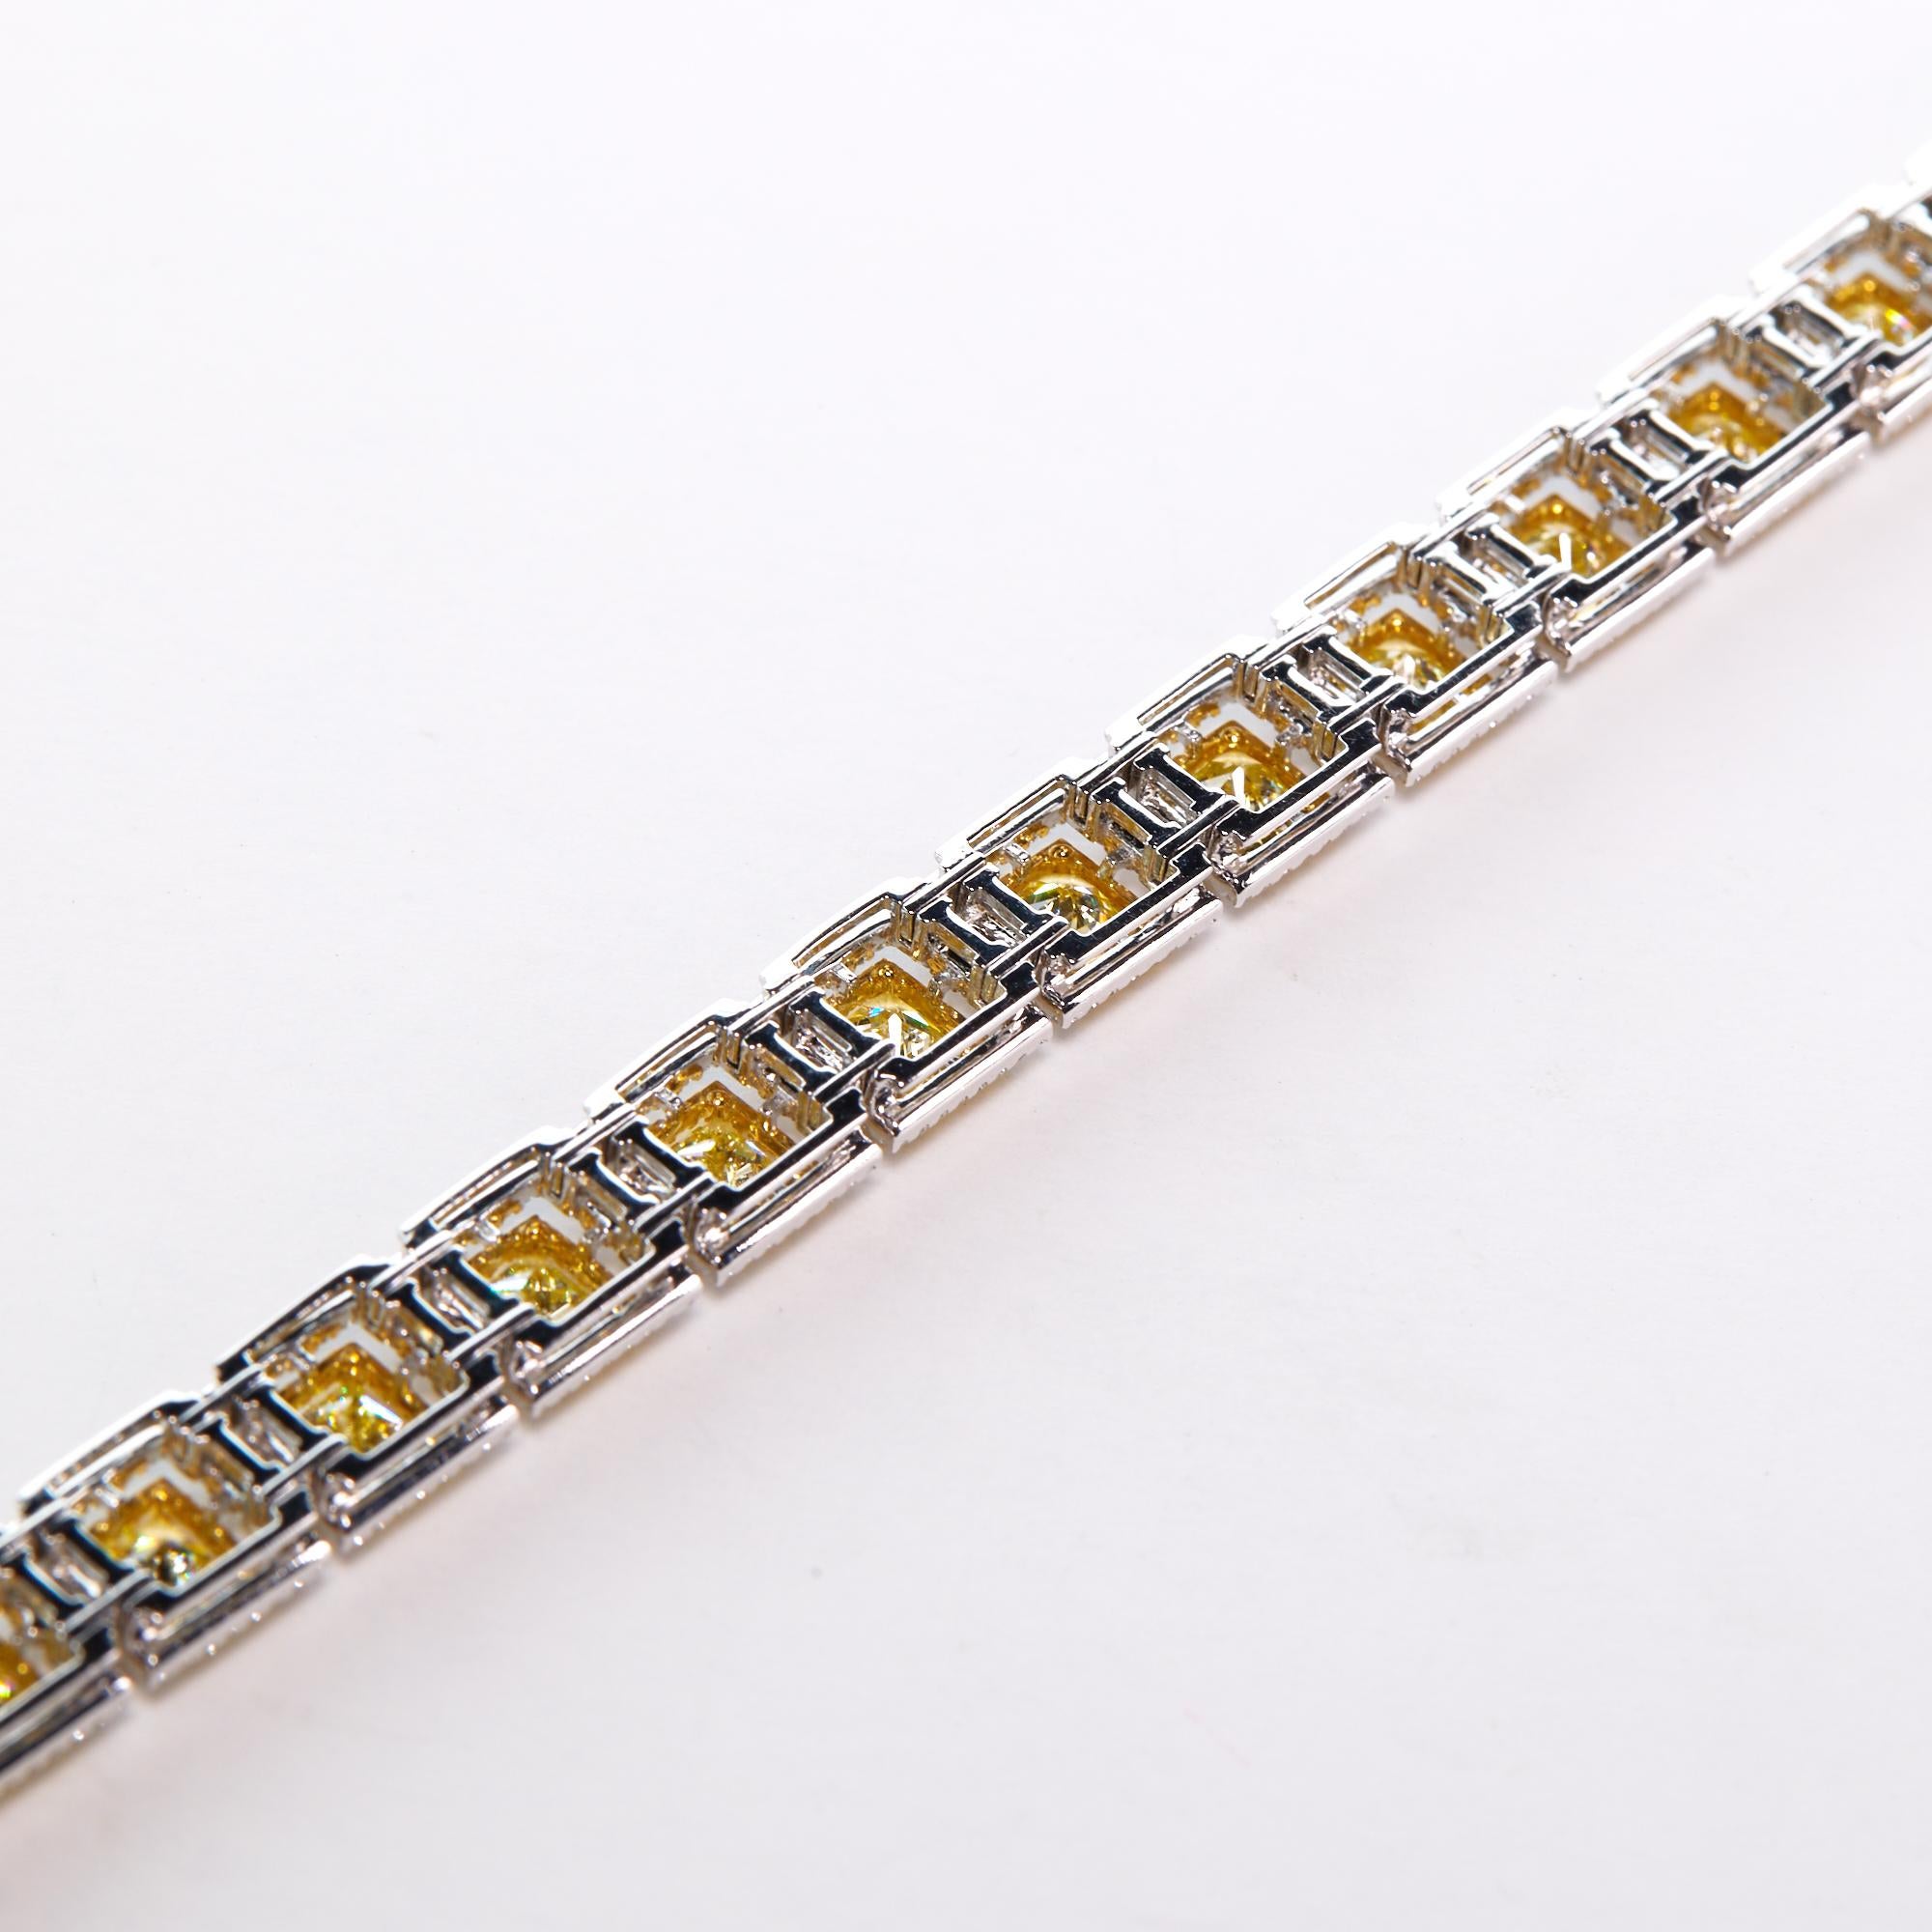 Fancy Yellow And White Diamond Modern Bracelet.  This modern tennis Bracelet has 13.36 carats of fancy yellow Princess cut diamonds, 1.59 carats of fancy yellow diamonds generously surround the larger stones, and 1.97 carats of round brilliant white